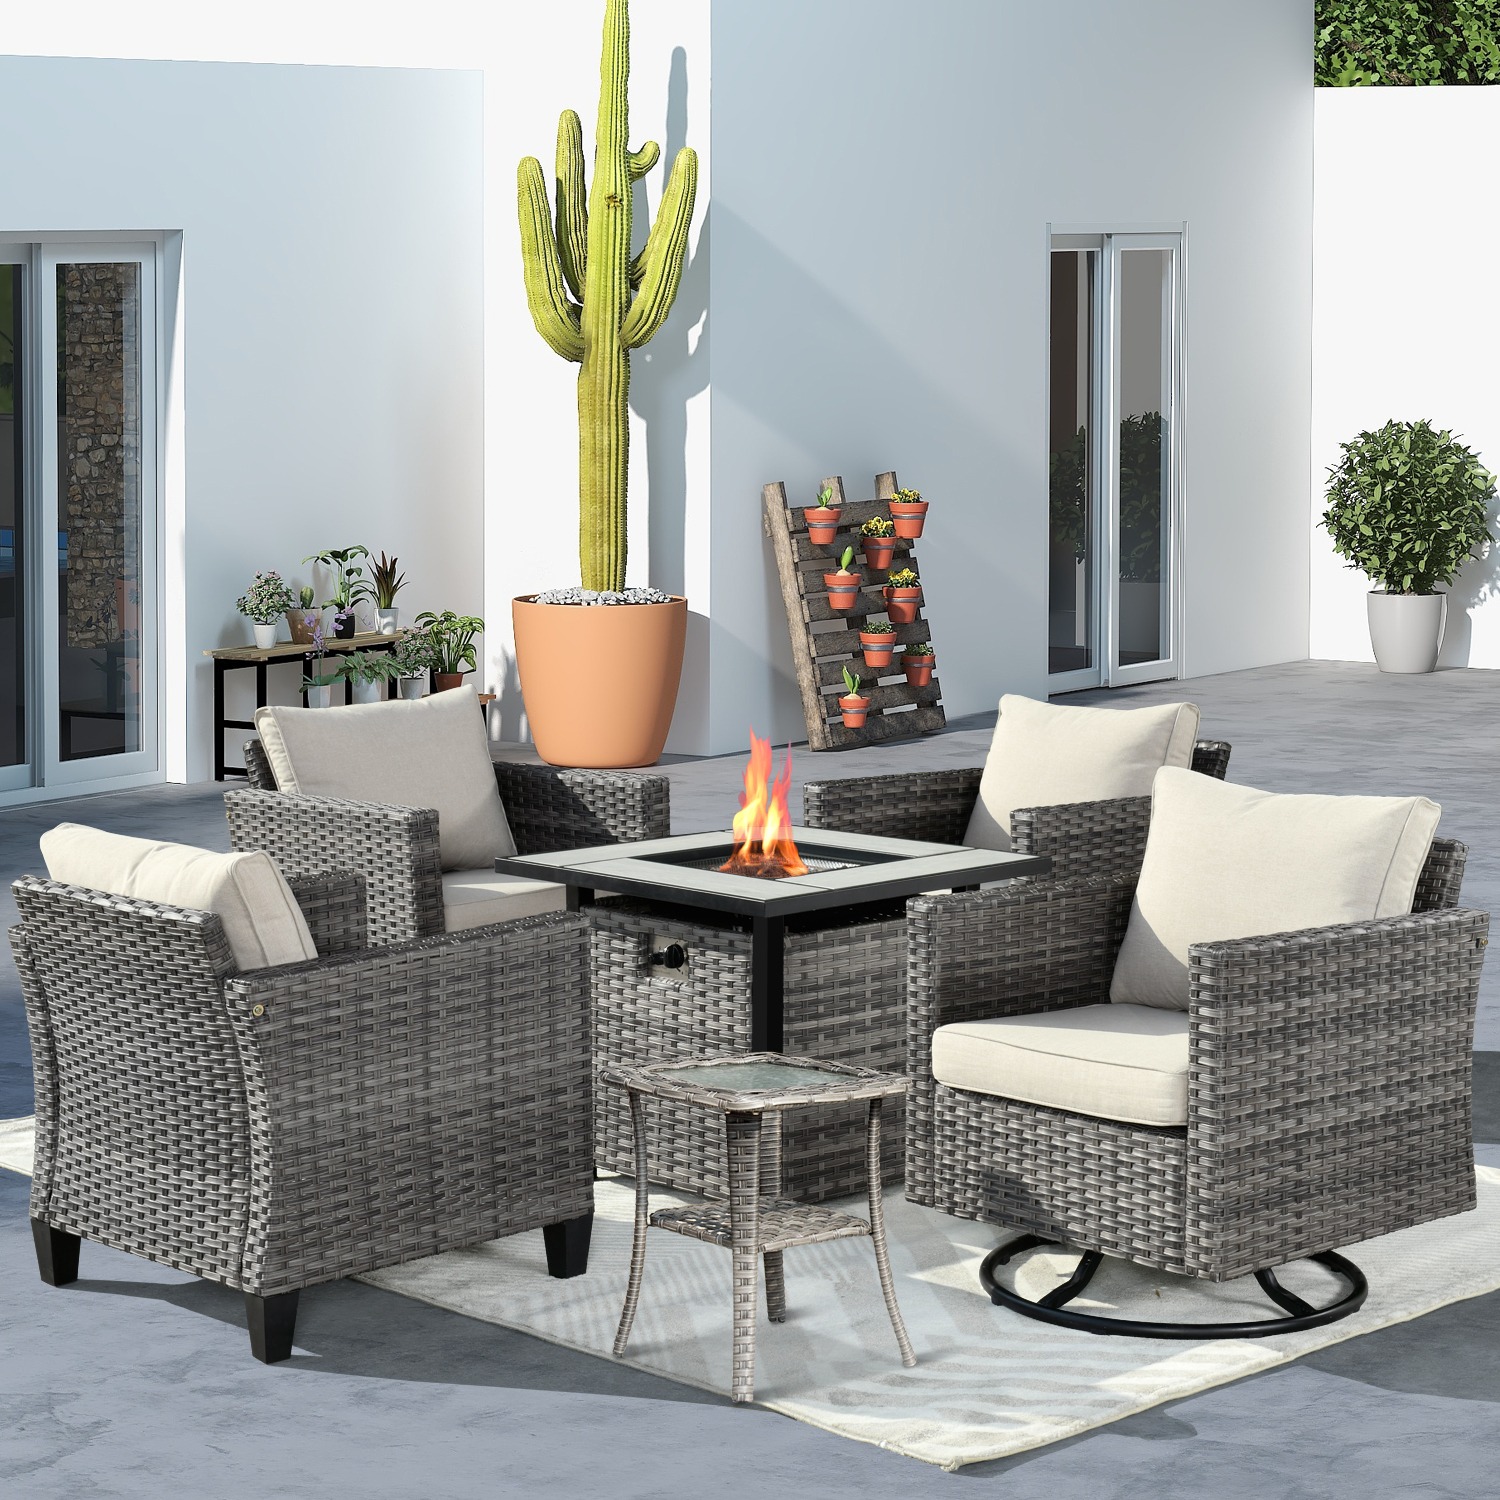 Ovios Patio Outdoor Furniture Set with Fire Pit Table 6 Pieces Outside Wicker Conversation with 360 Degrees Swivel Rocking Chair & Coffee Side Table, Metal, Wicker - image 2 of 9